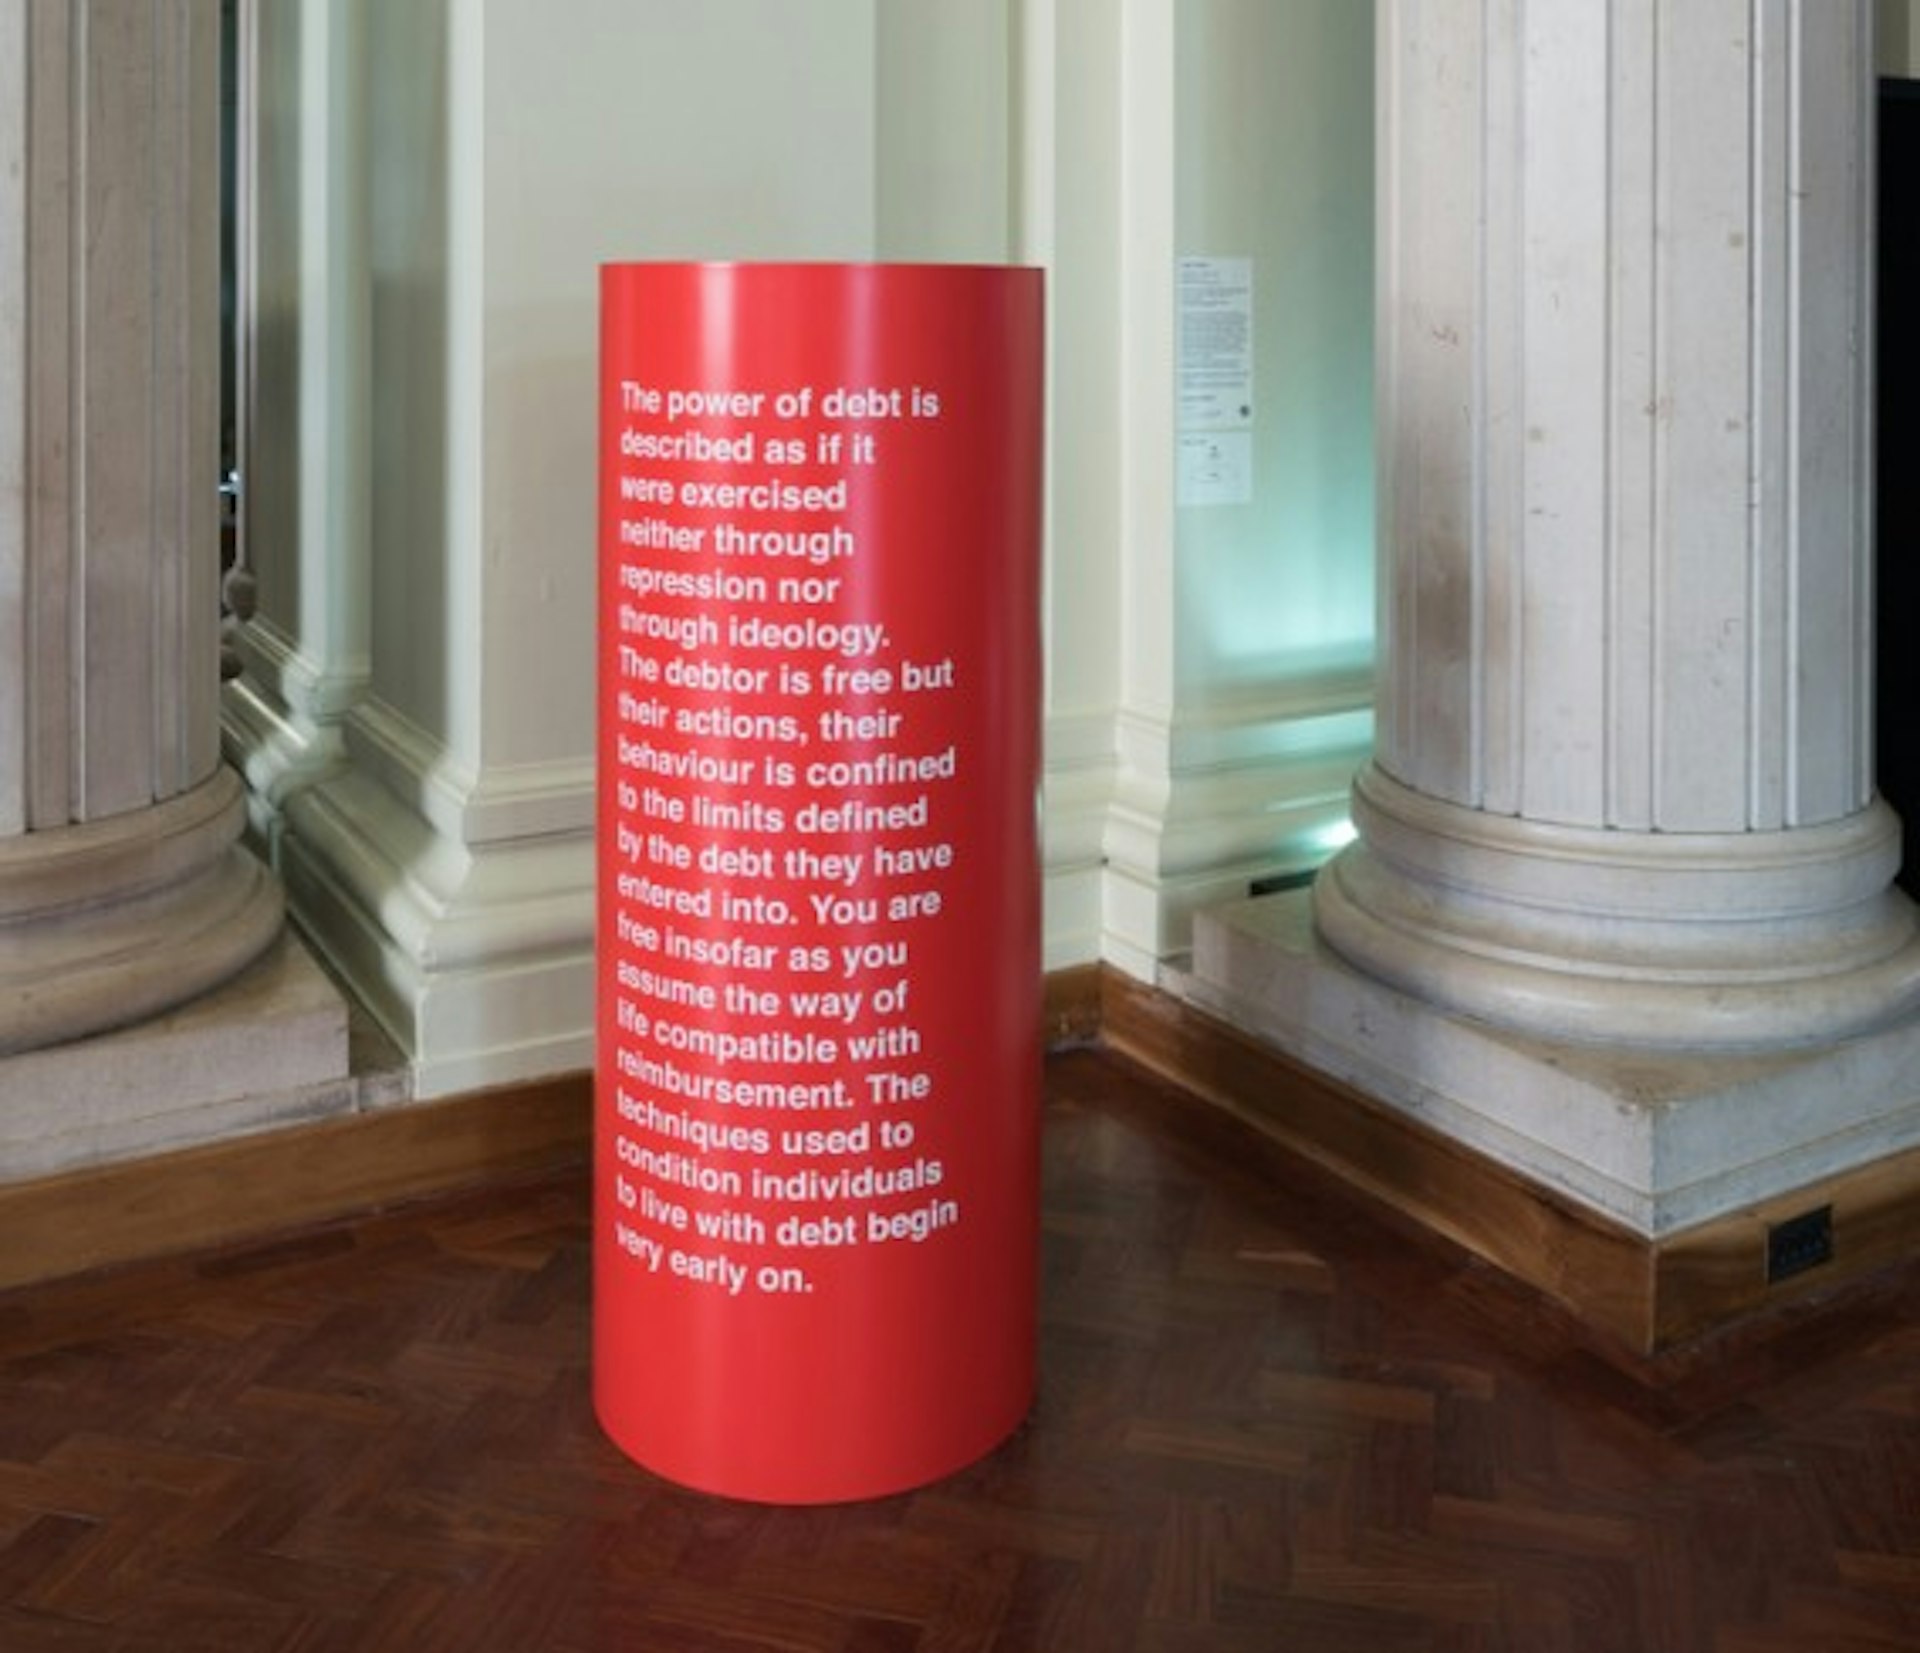 Liam Gillick, Lazzarato on Debt, 2015. Courtesy the artist and Maureen Paley, London © 